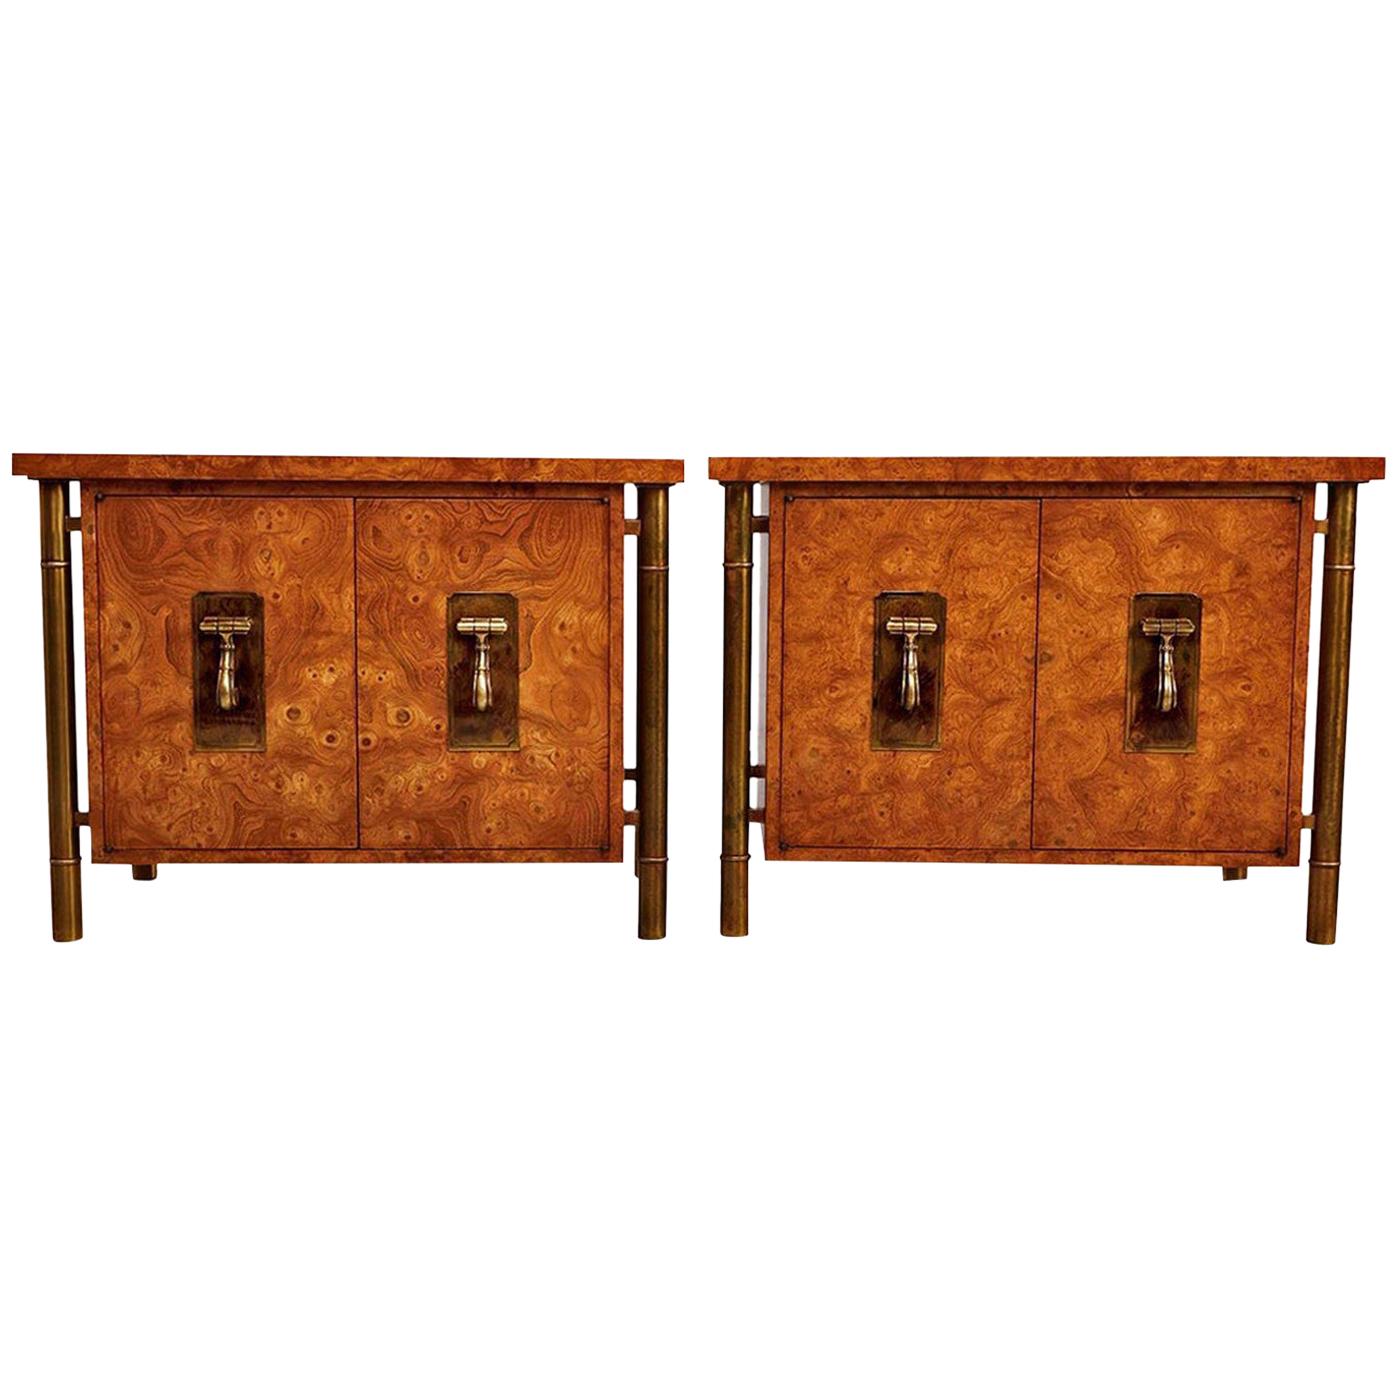 Breathtaking pair of burl wood and brass Mastercraft nightstands. Four tubular outer skeletal brass support legs create a floating effect for each cabinet. The columns are fashioned in the style of bamboo stalks to add an Eastern flare. Hollywood